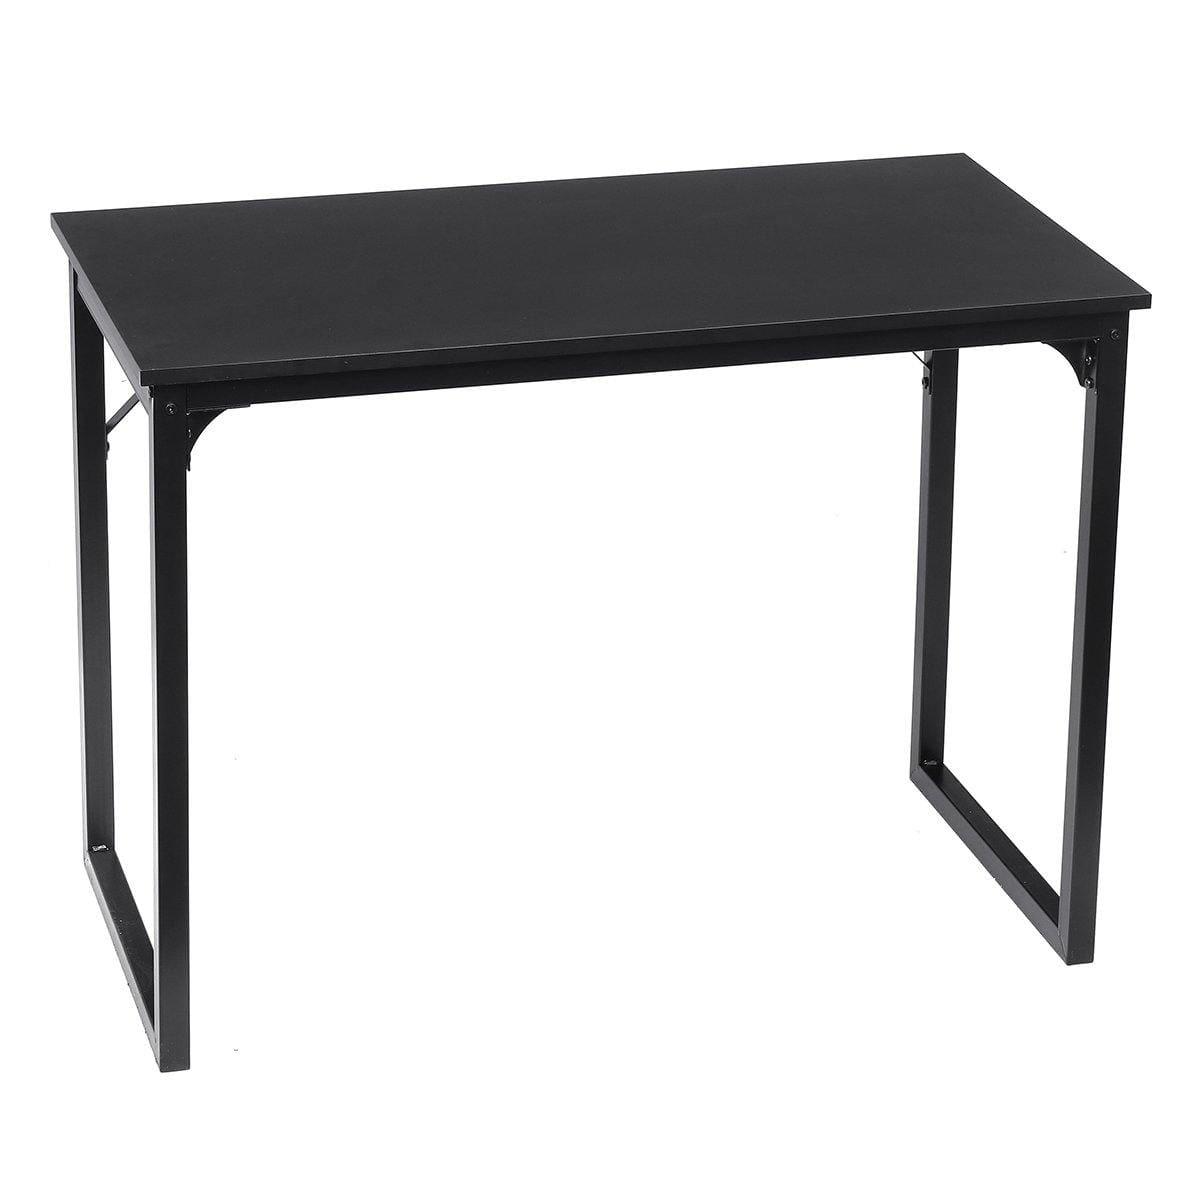 ezy2find desk Black Douxlife DL-OD03 Computer Desk Student Writing Study Table Laptop Desk Game Table for Home Office Supplies